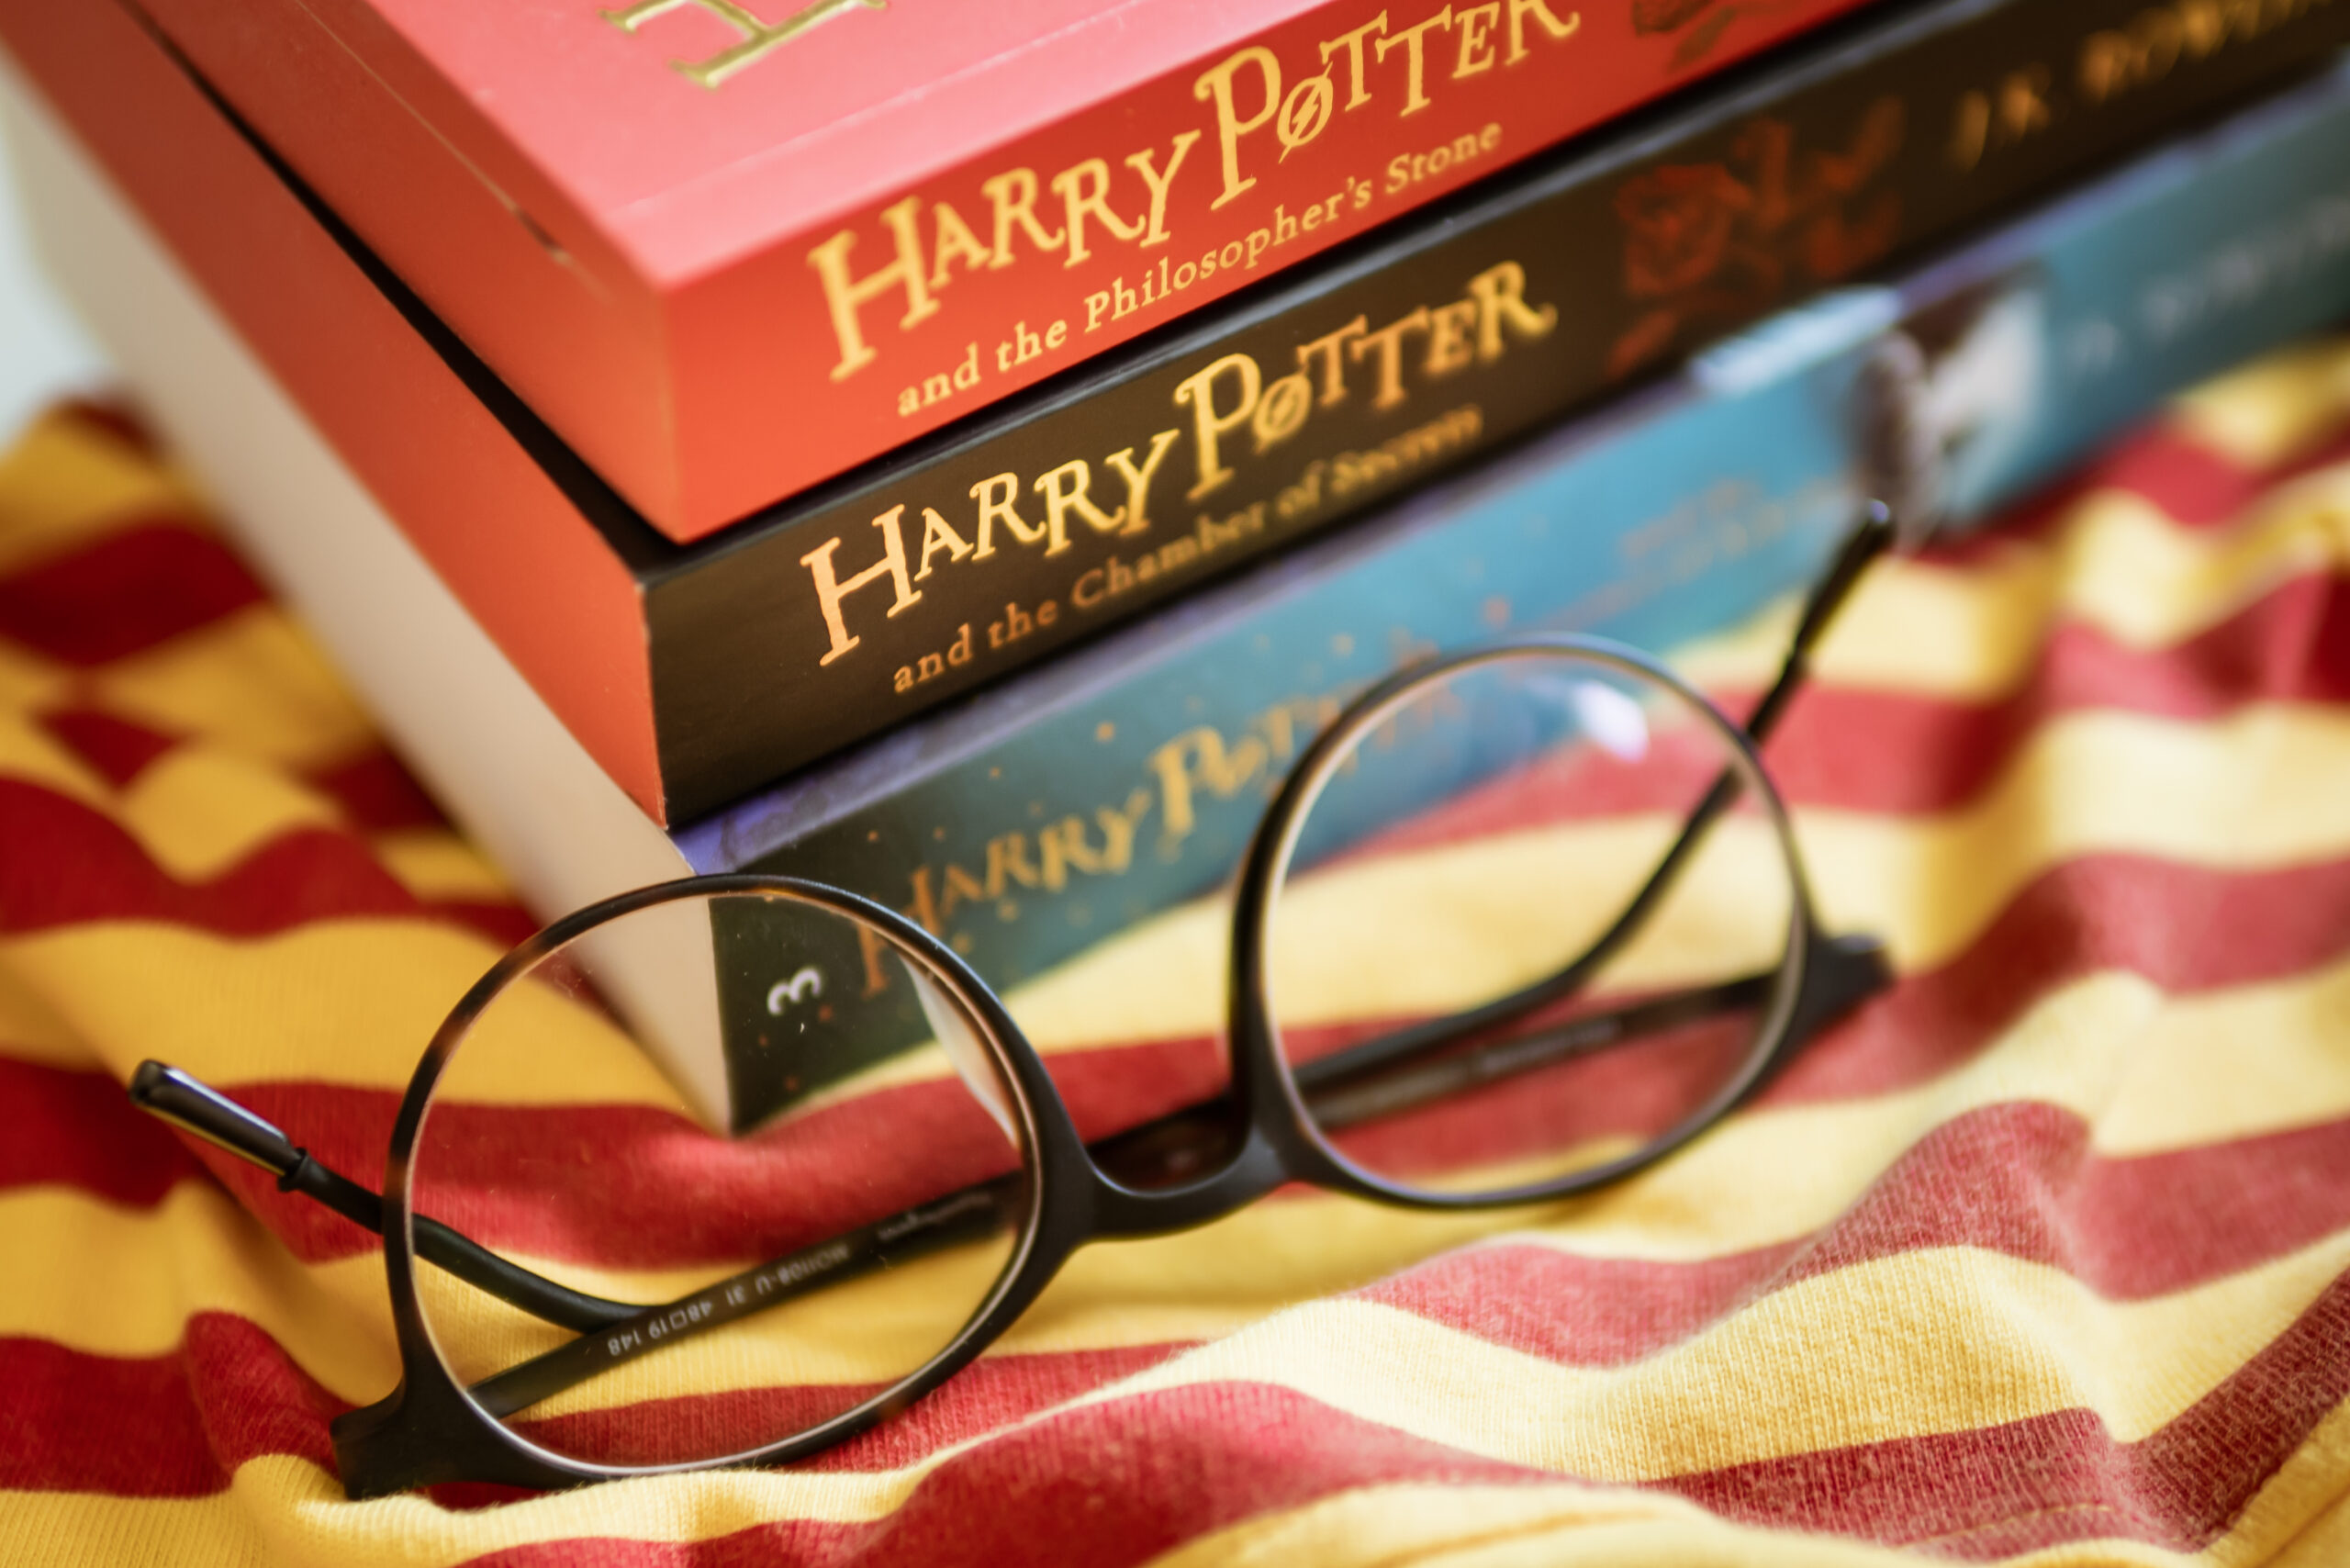 Magical method to learn English with Harry Potter